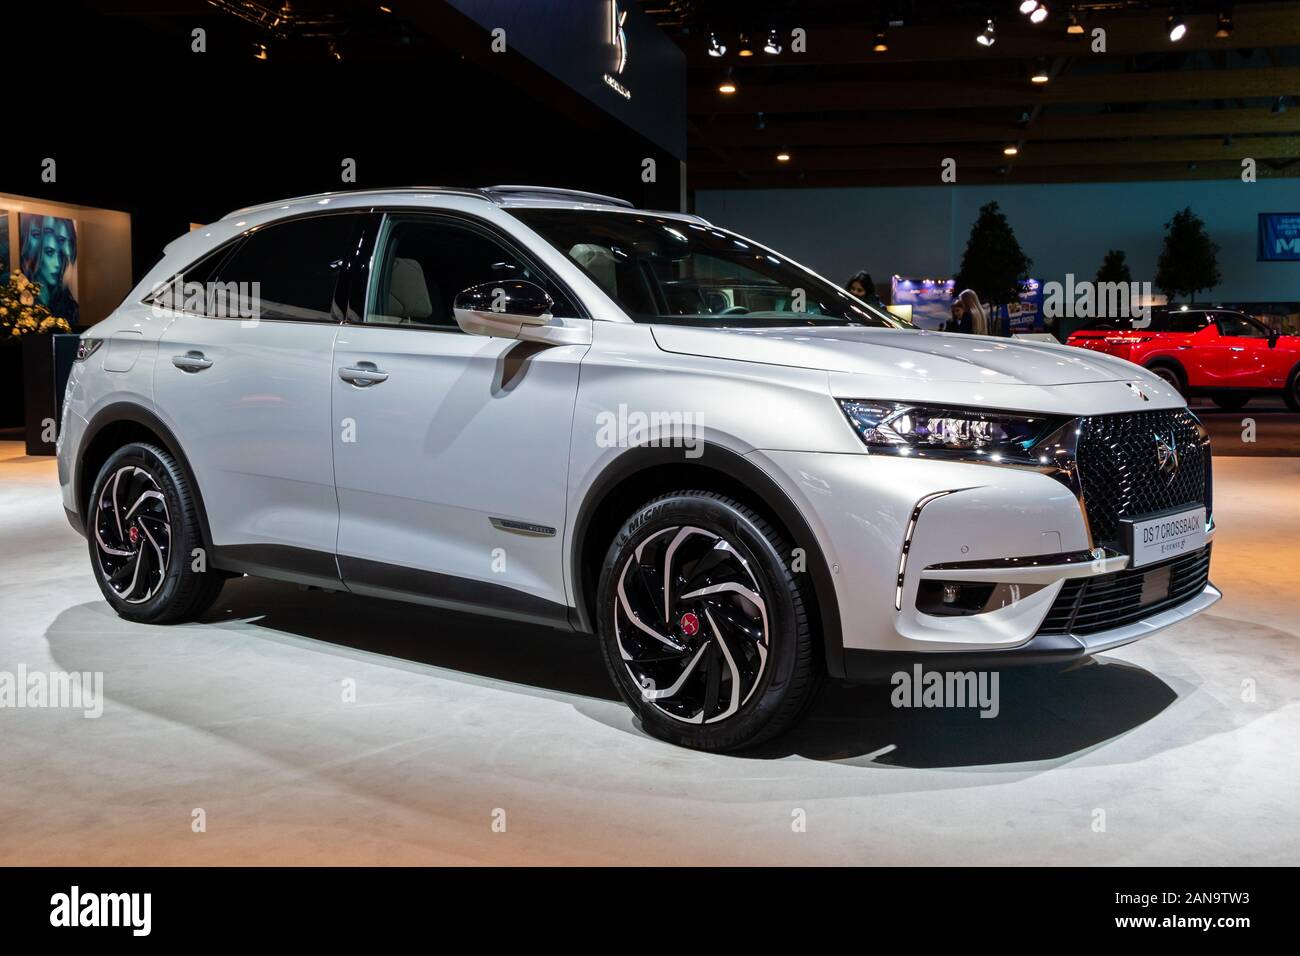 BRUSSELS - JAN 9, 2020: New 2020 DS 7 Crossback E-Tense car model presented at the Brussels Autosalon 2020 Motor Show. Stock Photo